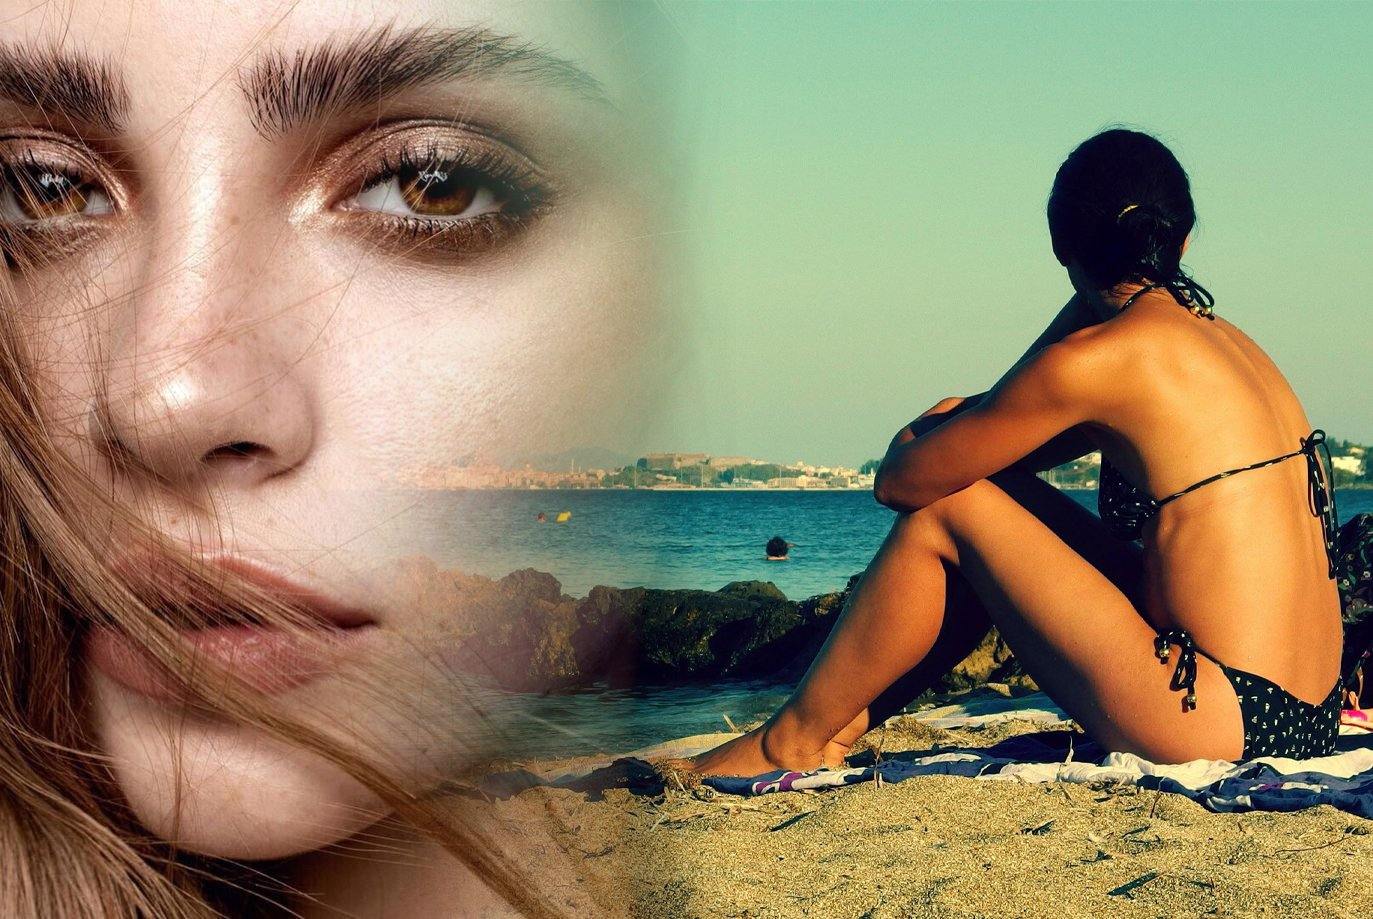 Bronzed: The Perfect Guide for Achieving a Sun-kissed, Summertime Glow - SoleneBoutique